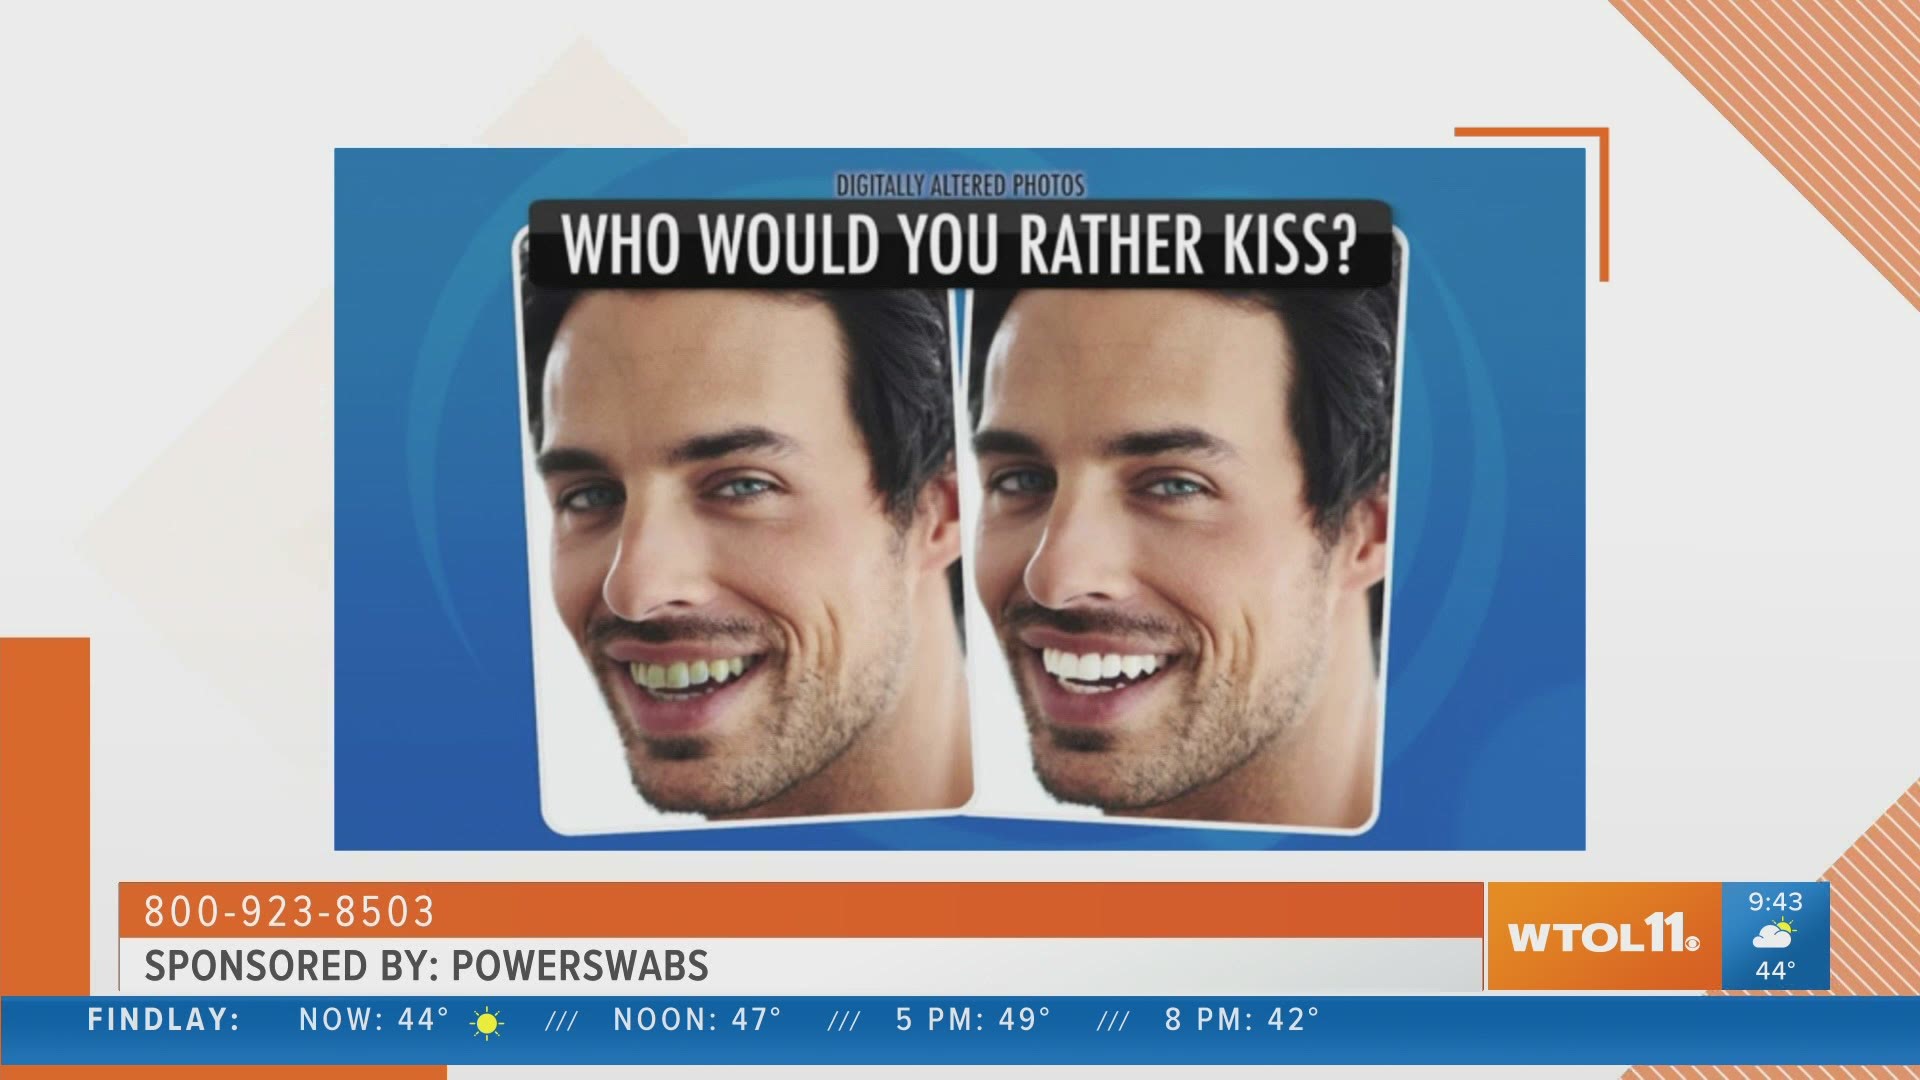 Confidence starts with a smile, and Powerswabs can help you get a bright one!